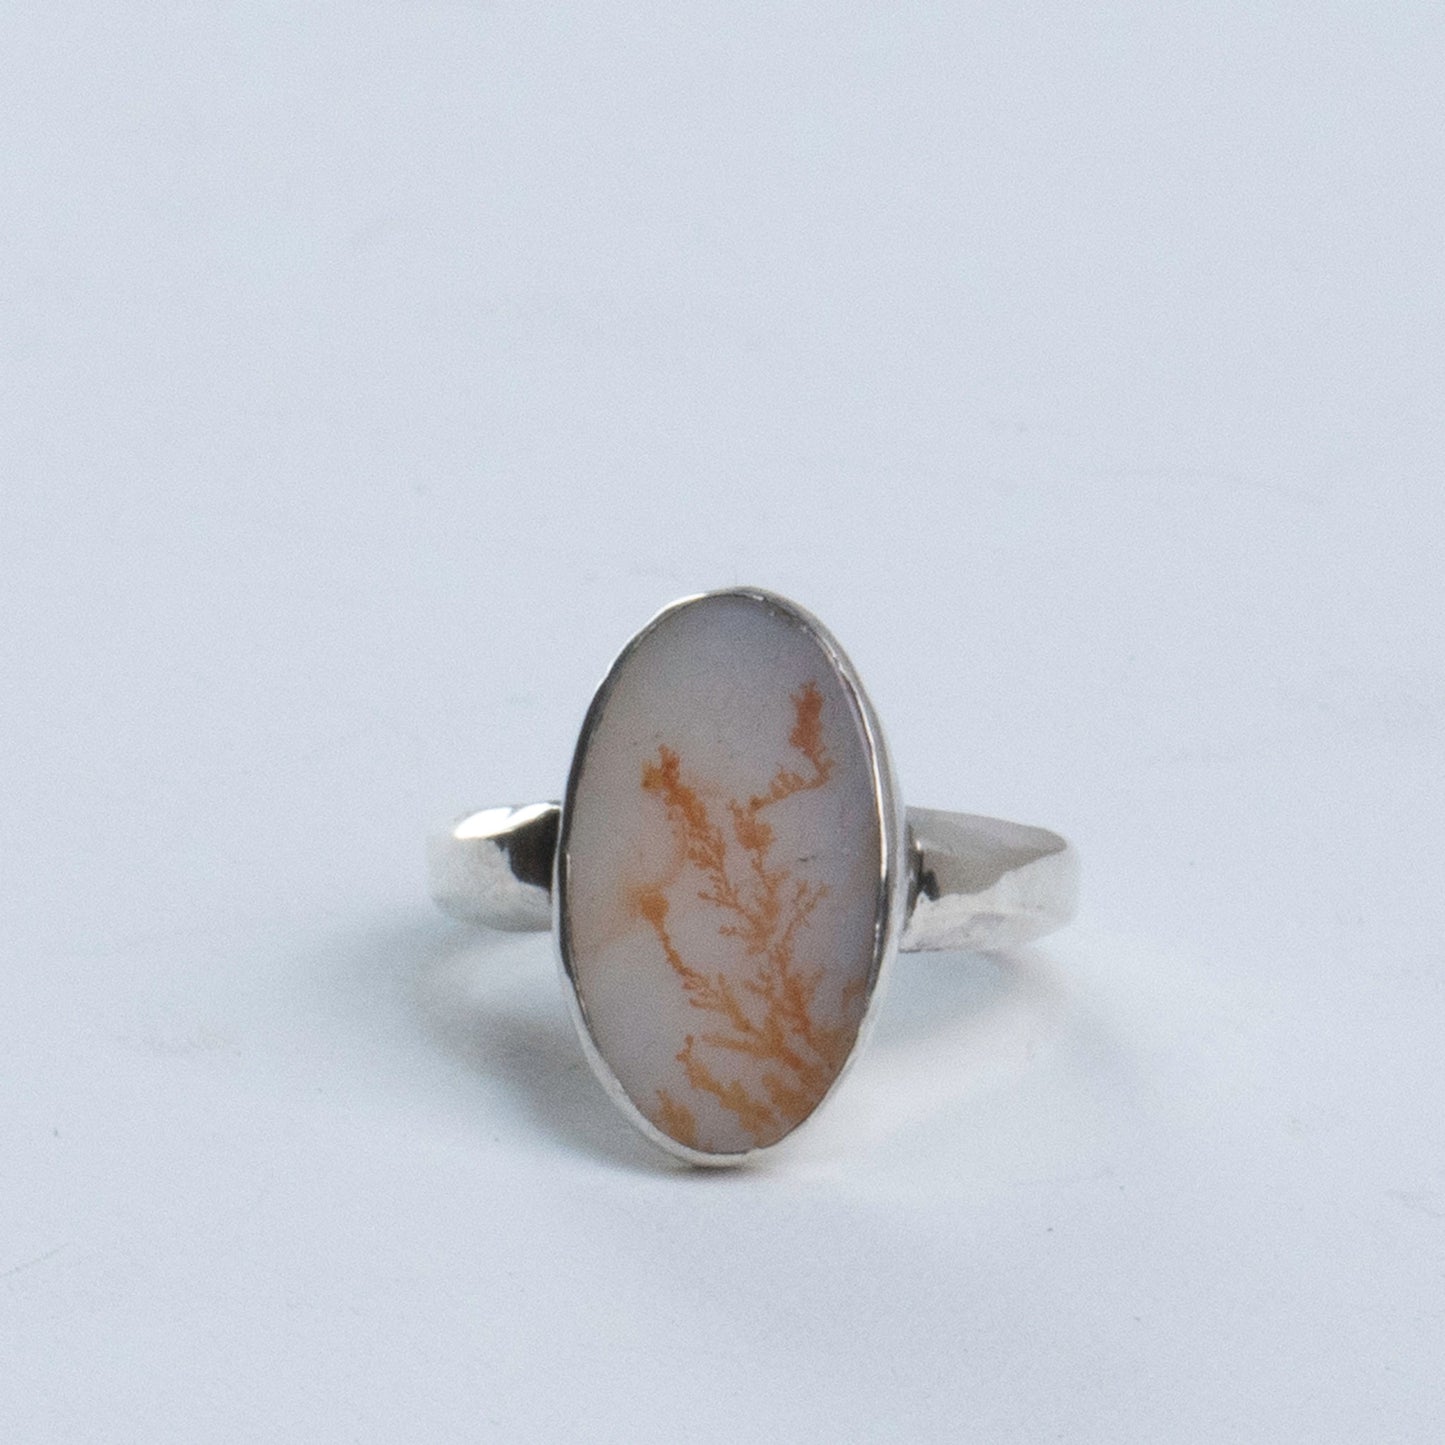 Orange Coral Agate Ring (One of a Kind)